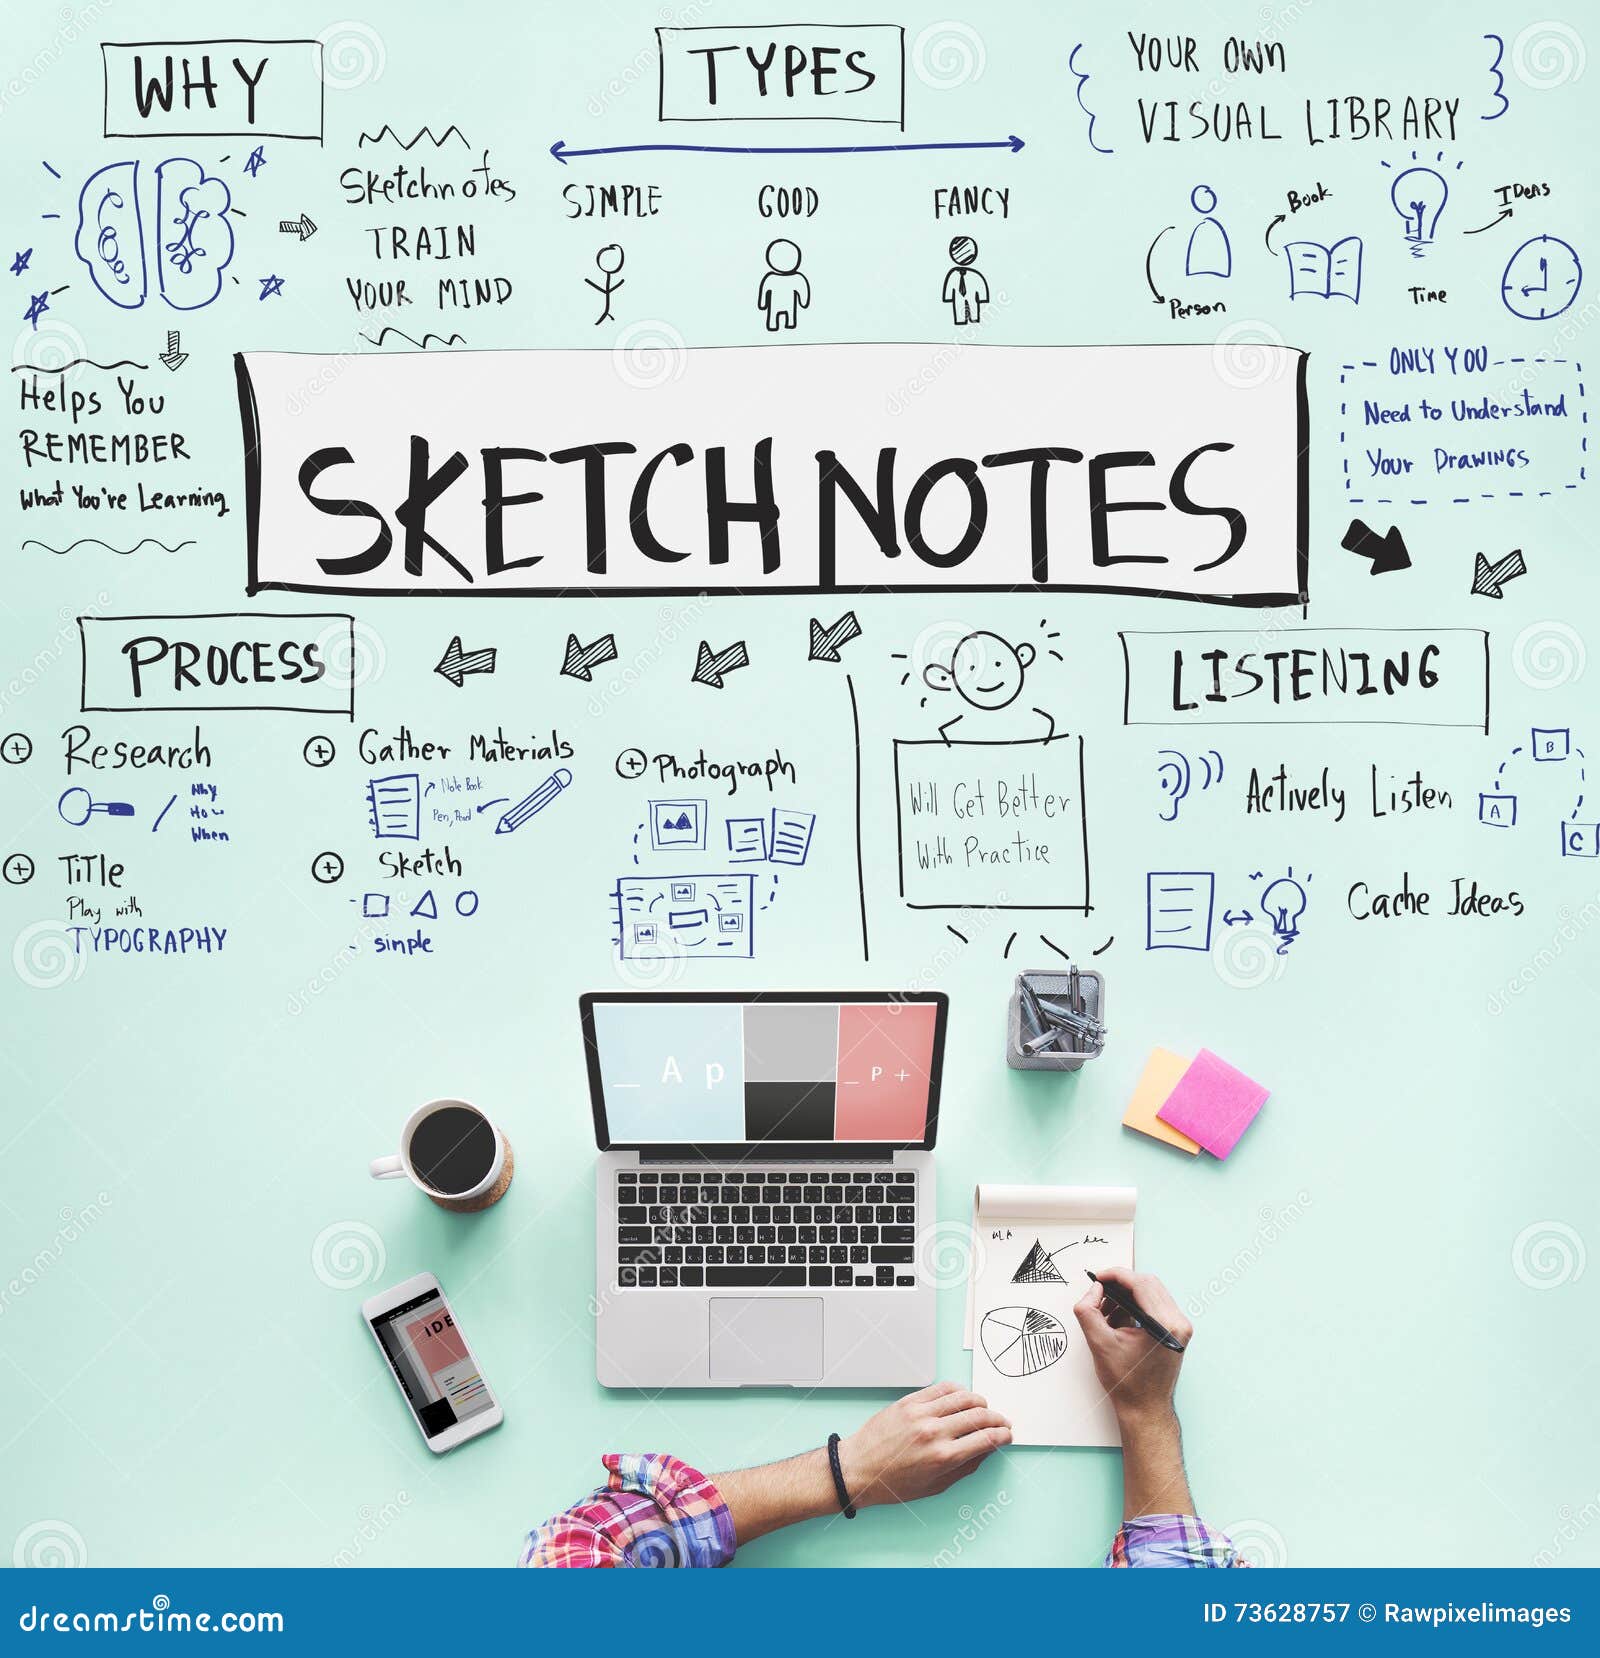 Sketchnotes: Book Summary - Published in The Sketchnote Wo… | Flickr